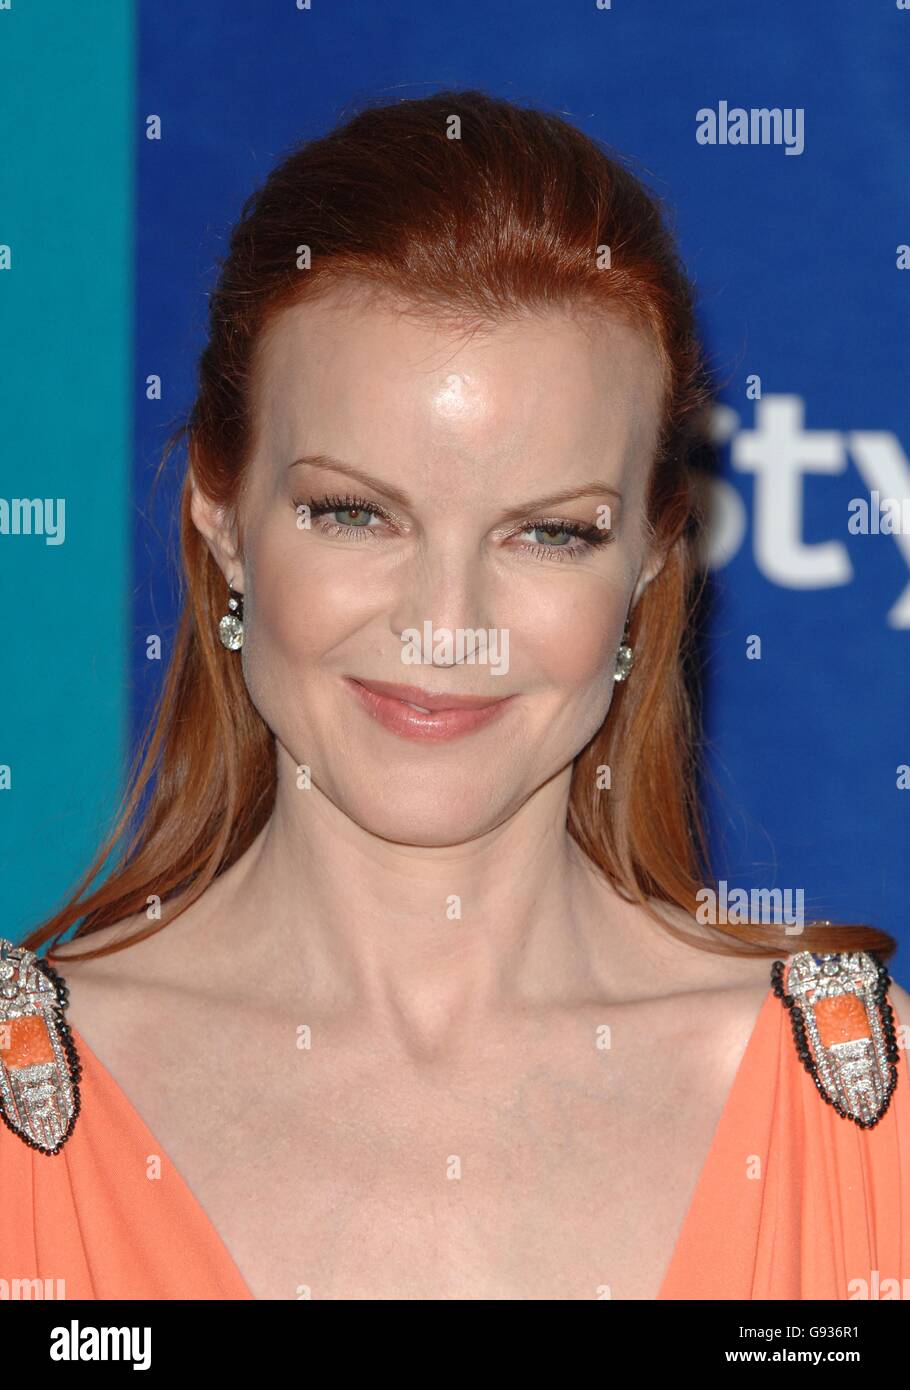 Marcia Cross arrives at the InStyle / Warner Bros. party following the Golden Globe Awards, at the Hollywood Hilton, Los Angeles, Monday 16 January 2006. PRESS ASSOCIATION Photo. Photo credit should read: Ian West/PA Stock Photo